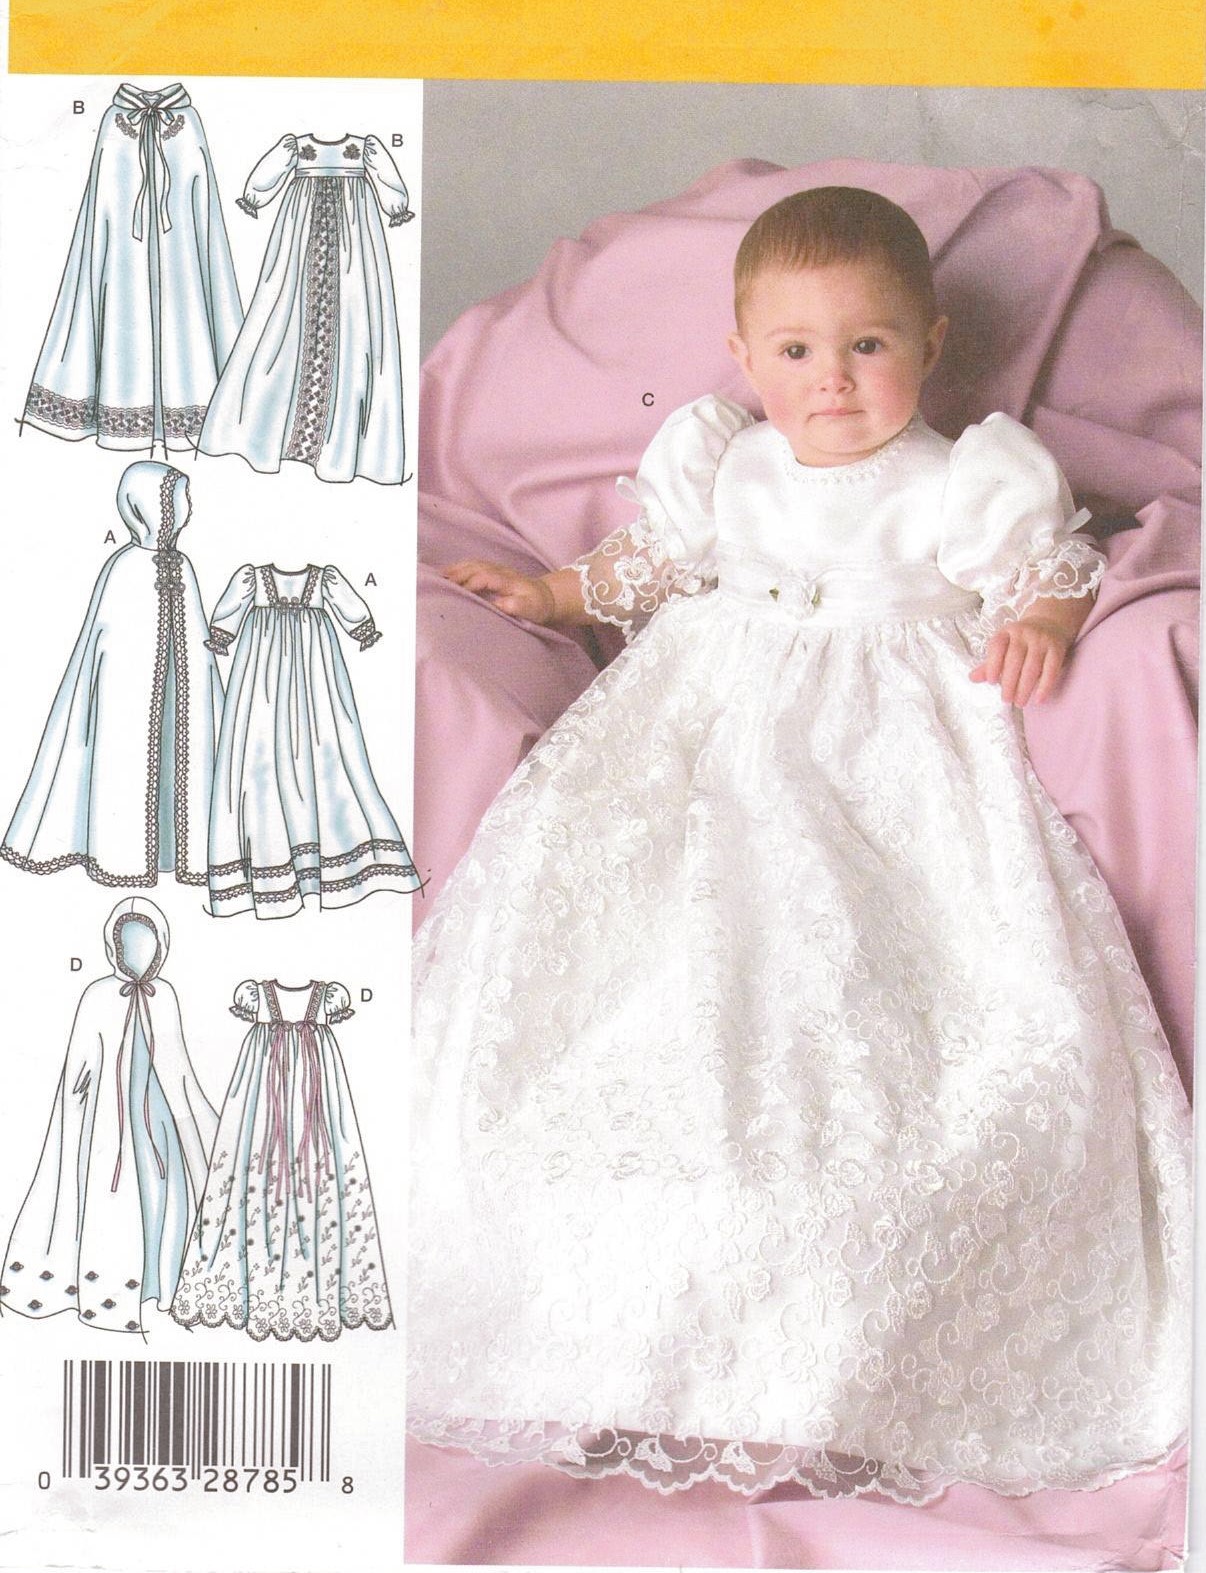 Pattern for Traditional Hand Knit Christening Gown - Pretty Lady Knits